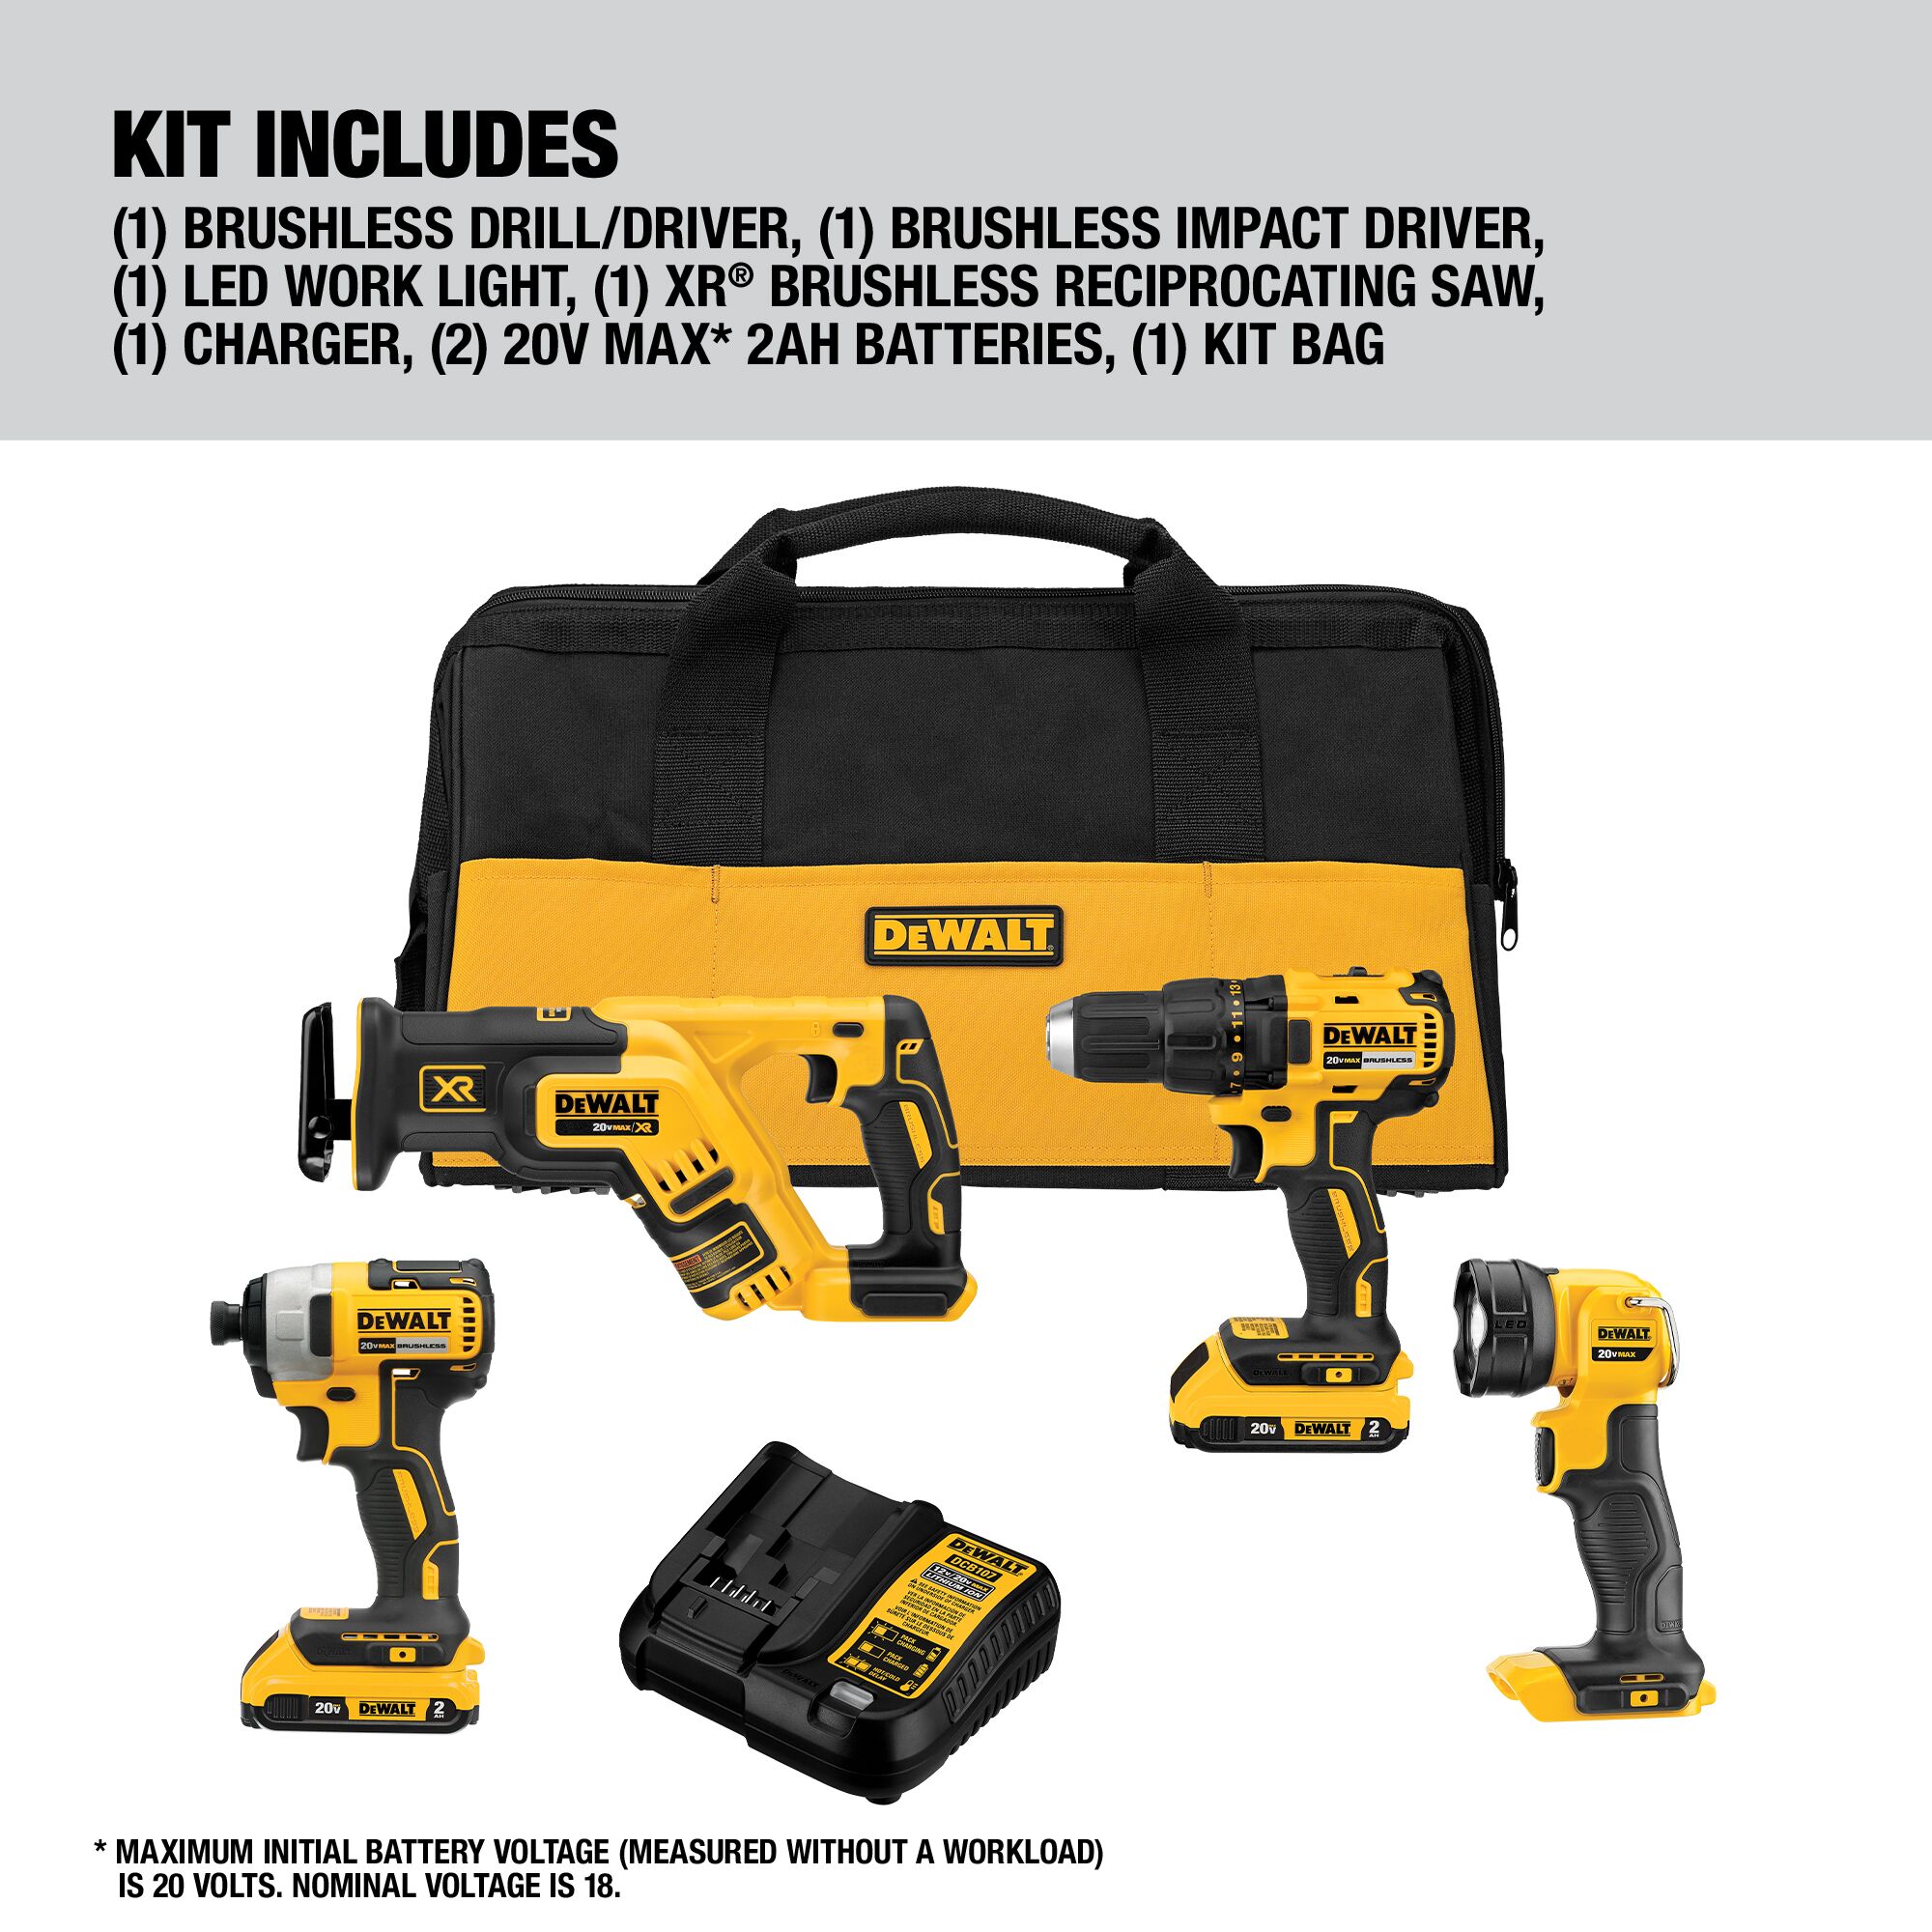 DeWALT 20V Drill and Grinder Combo Tool Kit at Tractor Supply Co.